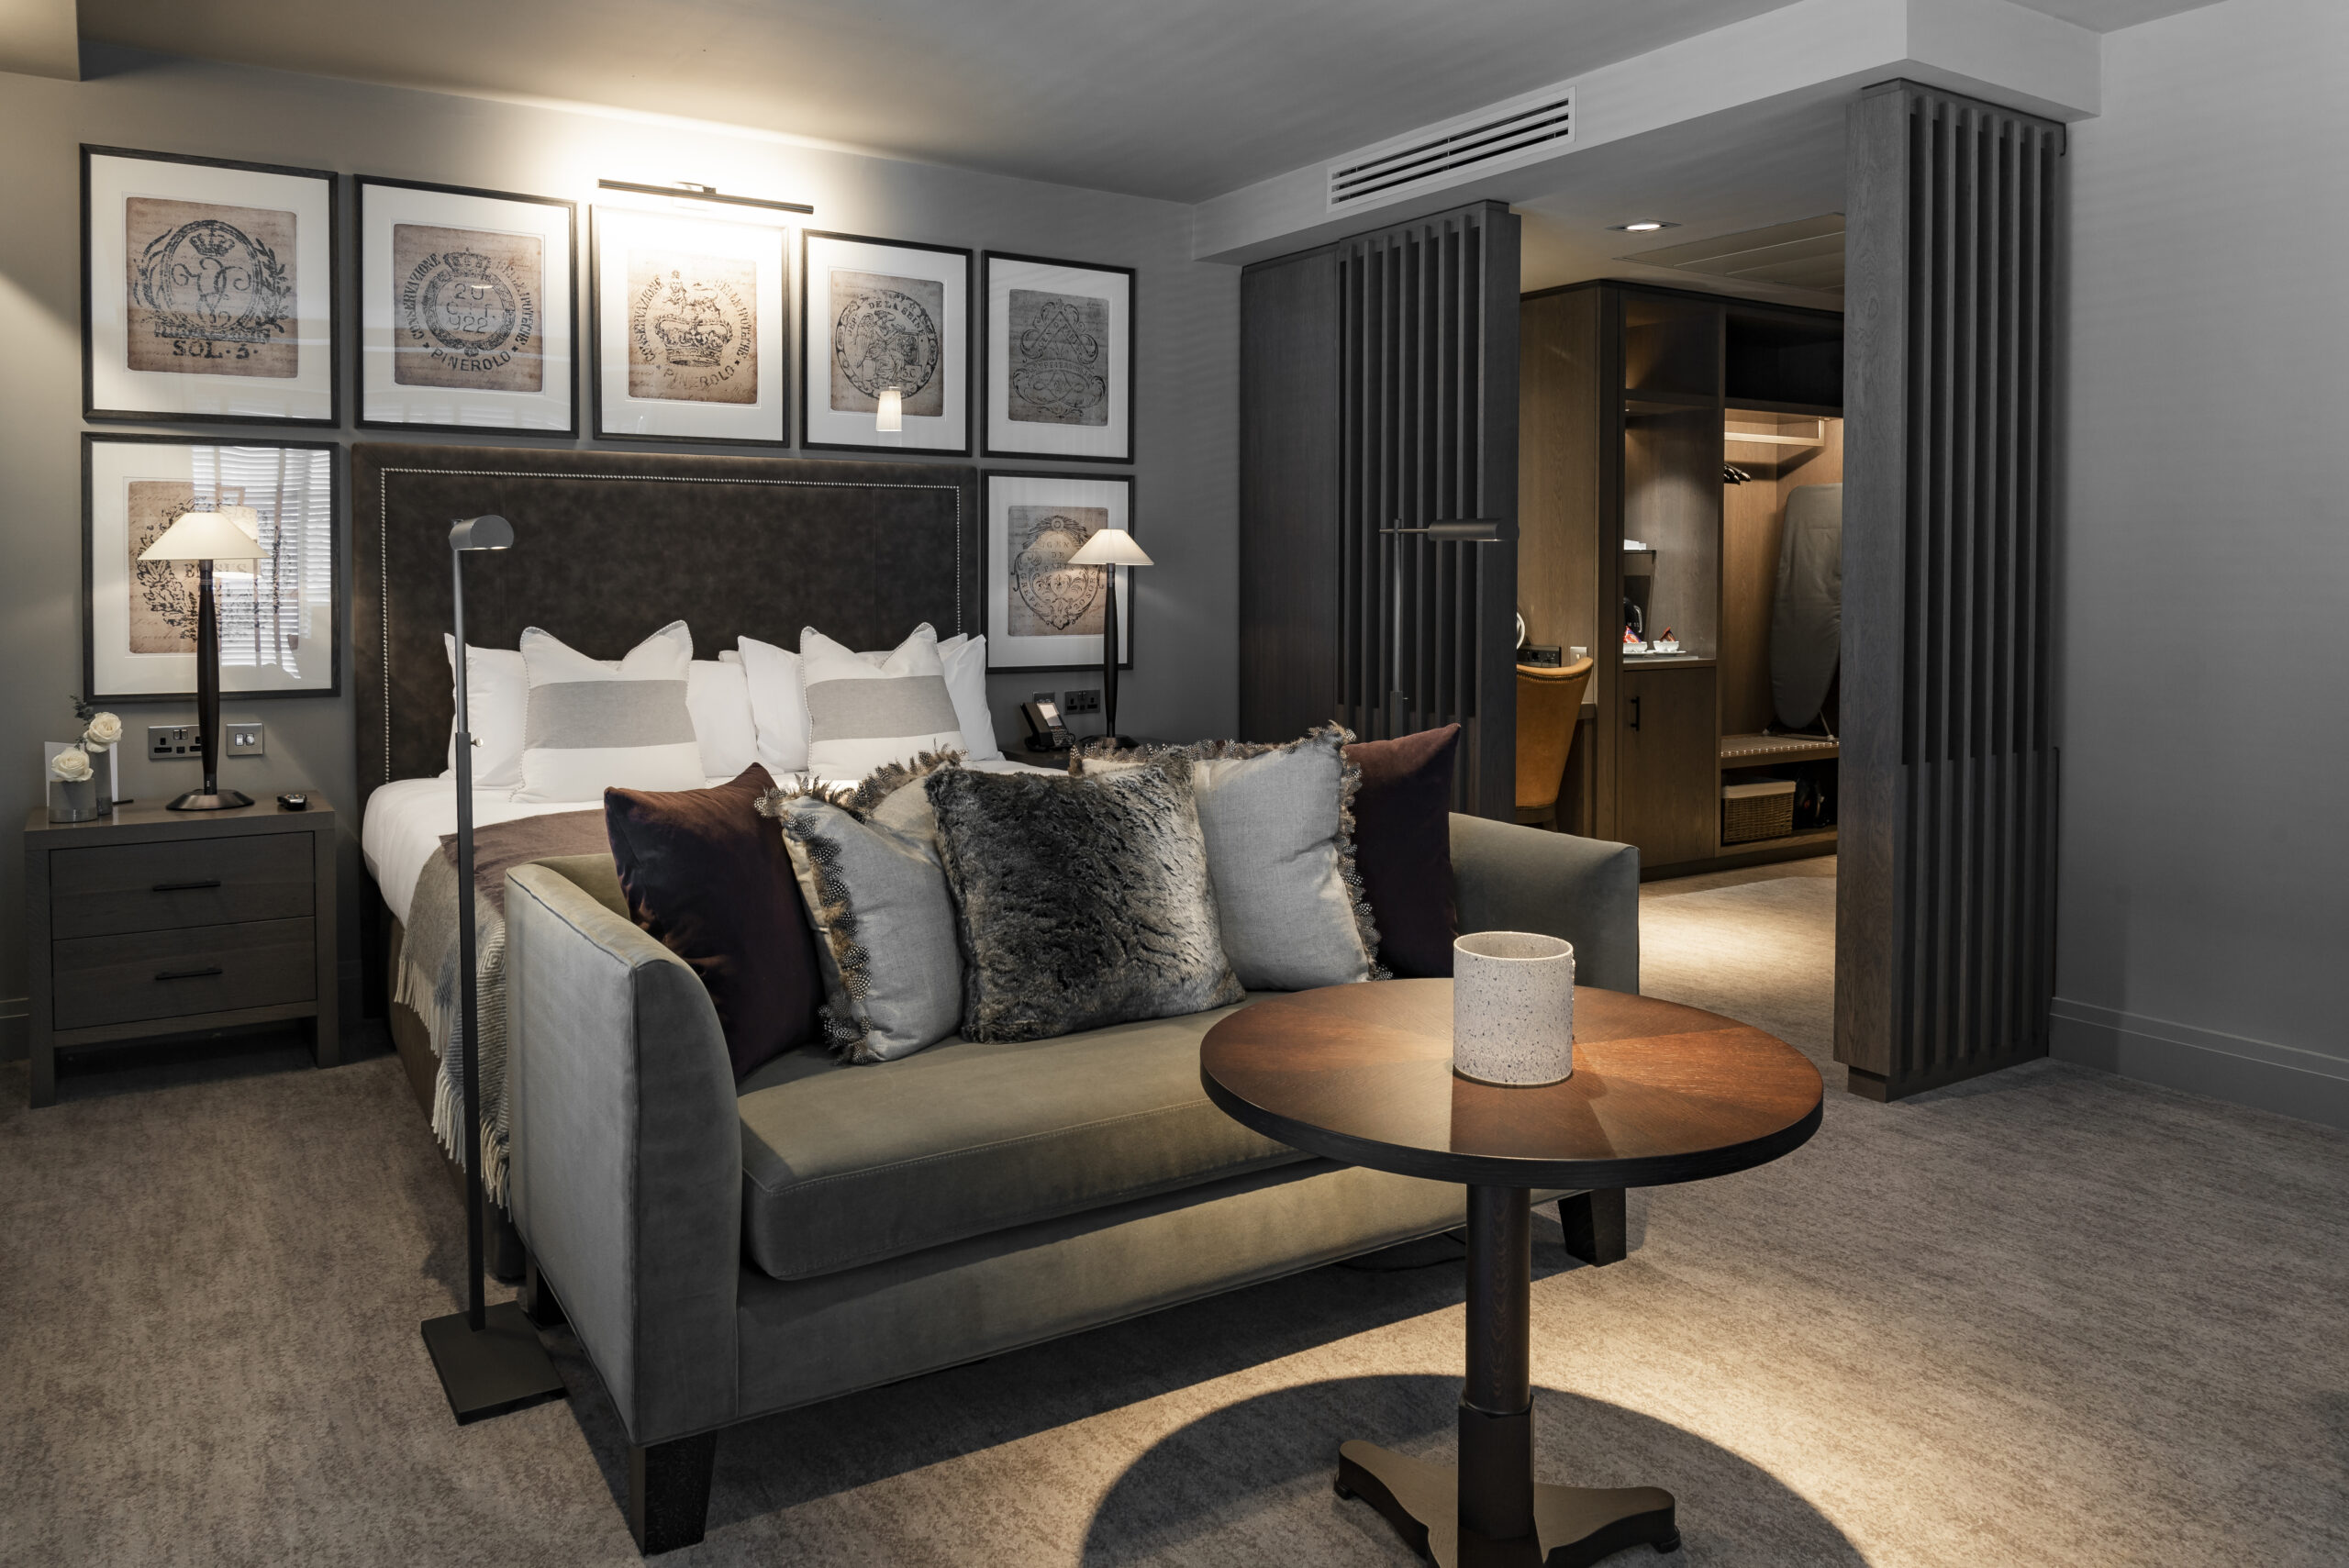 An executive suite at Dakota Hotel, which has submitted plans for a new location at Manchester Airport